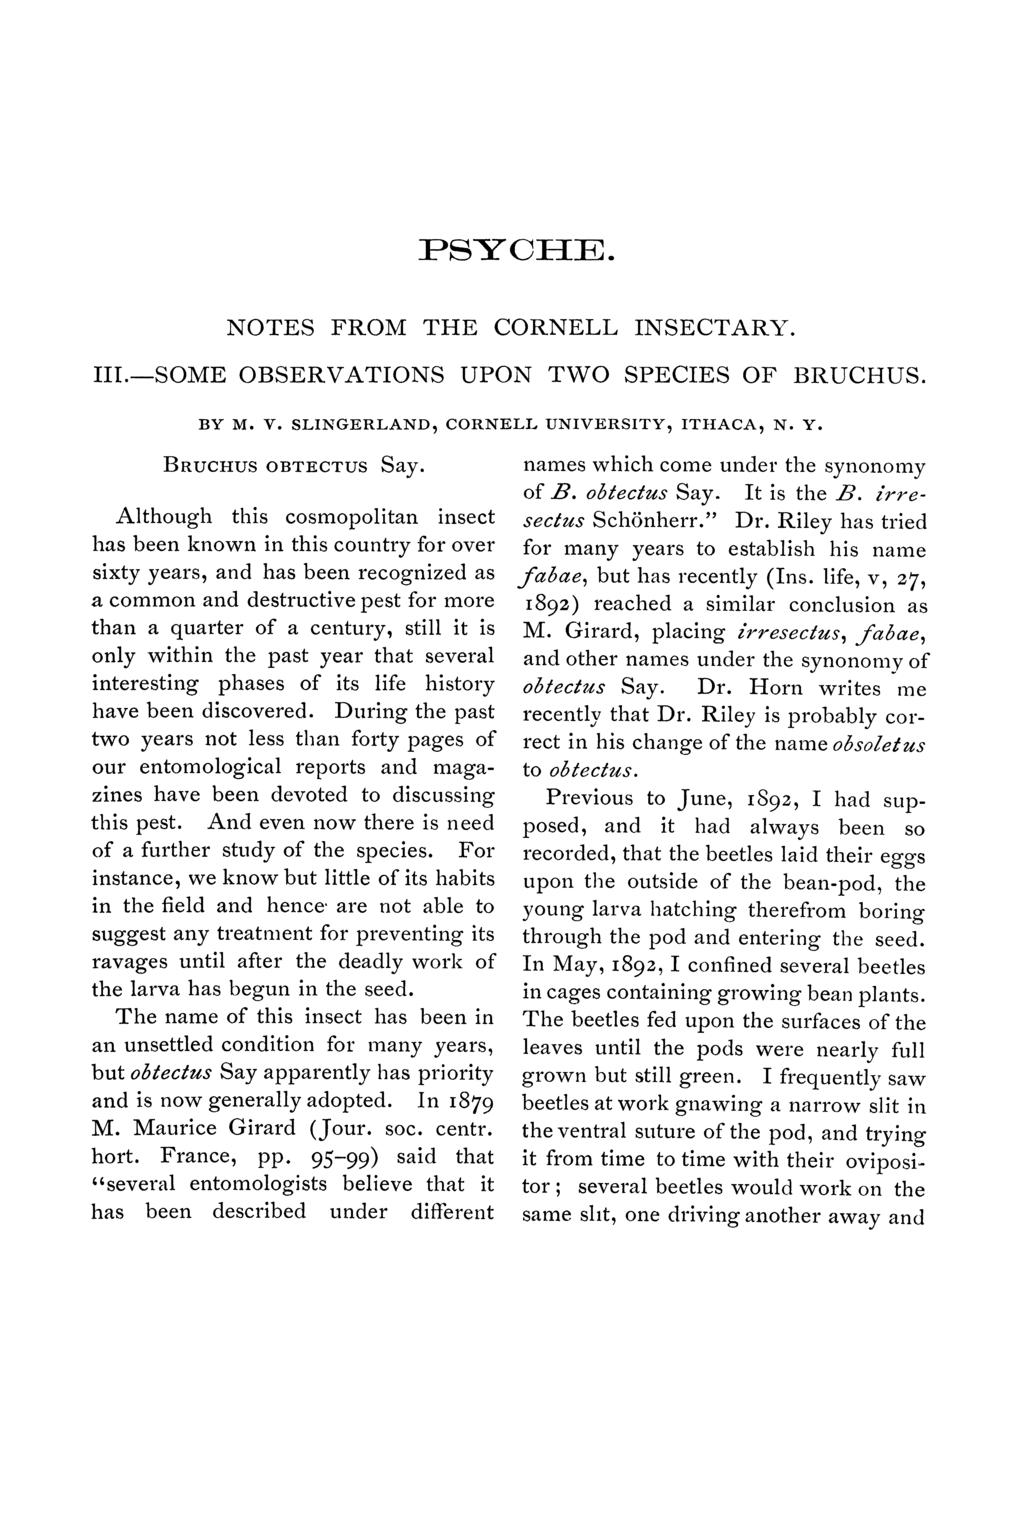 PSYCHE. NOTES FROM THE CORNELL INSECTARY. III.mSOME OBSERVATIONS UPON TWO SPECIES OF BRUCHUS. BY M. V. SLING]RLAND, CORNILL UNIVERSITY, ITttACA, N. Y. BRUCHUS OBT:ECTUS Say.